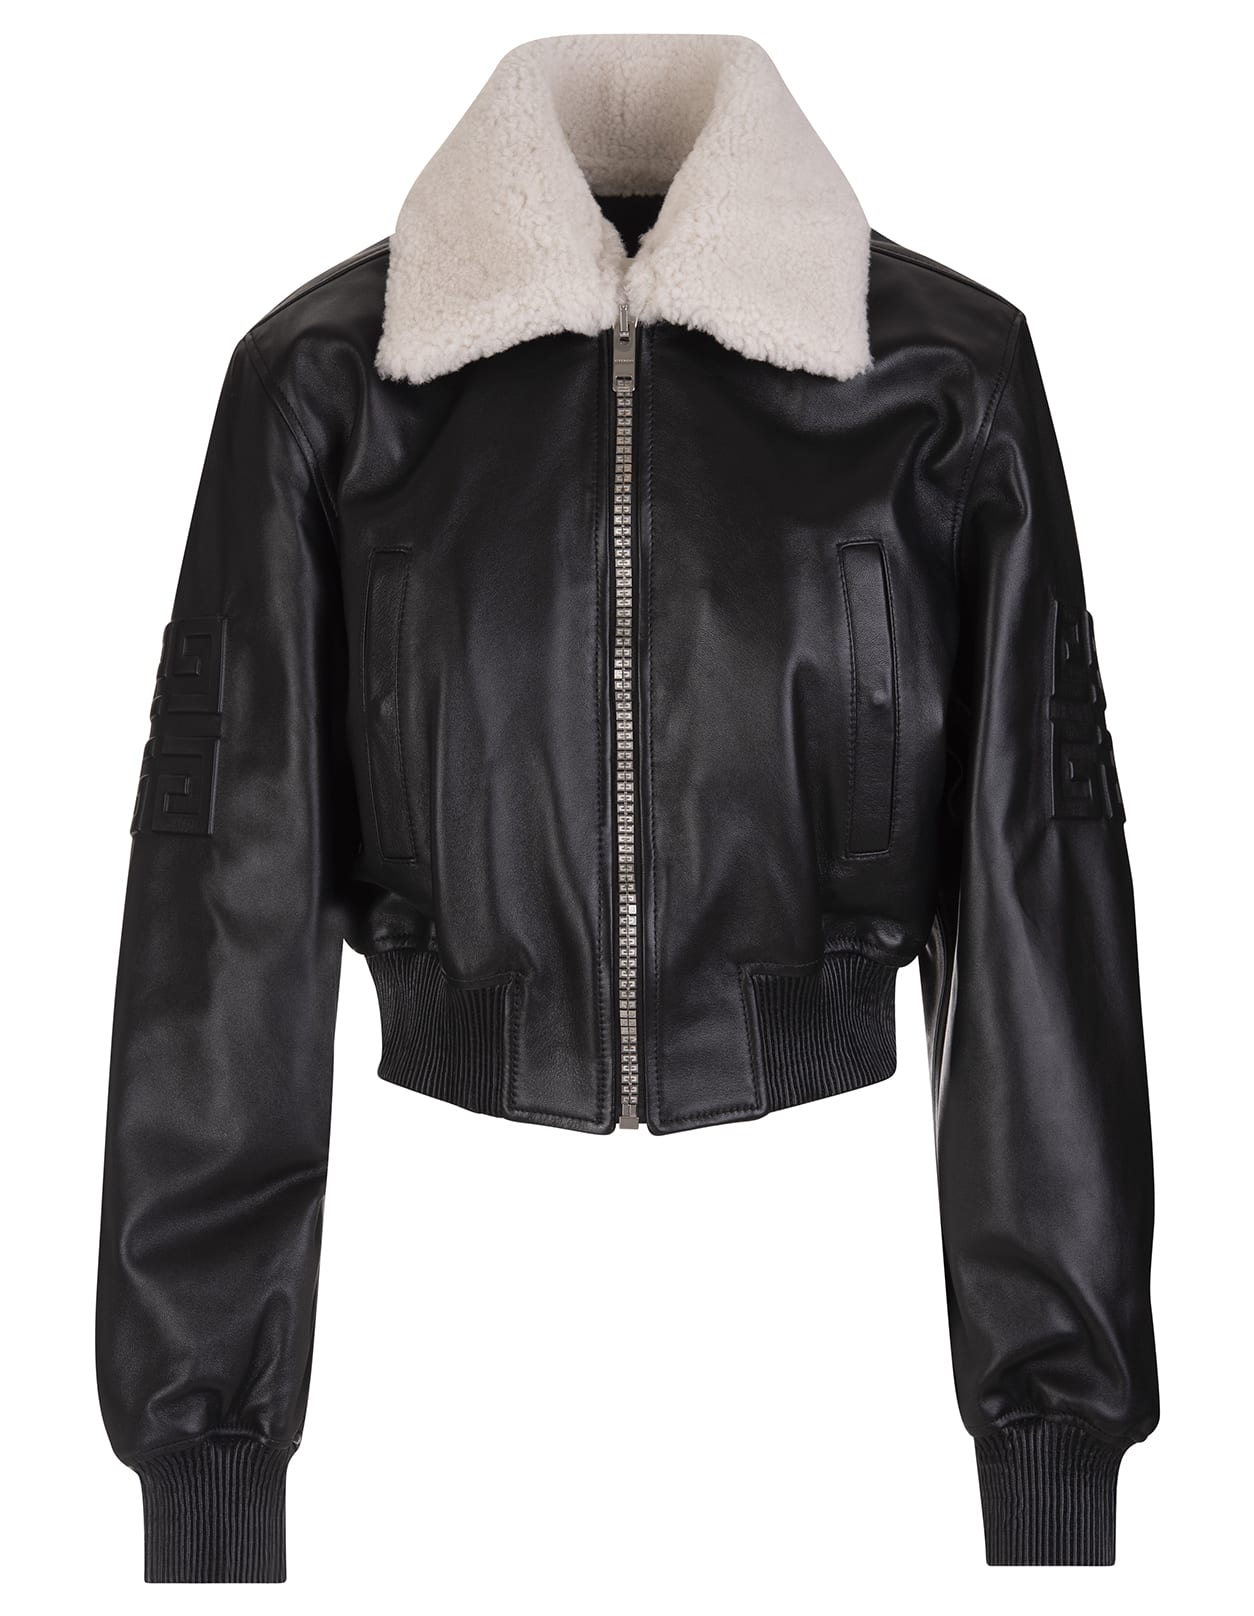 Givenchy Woman Bomber Jacket In Black Leather With White Shearling Collar